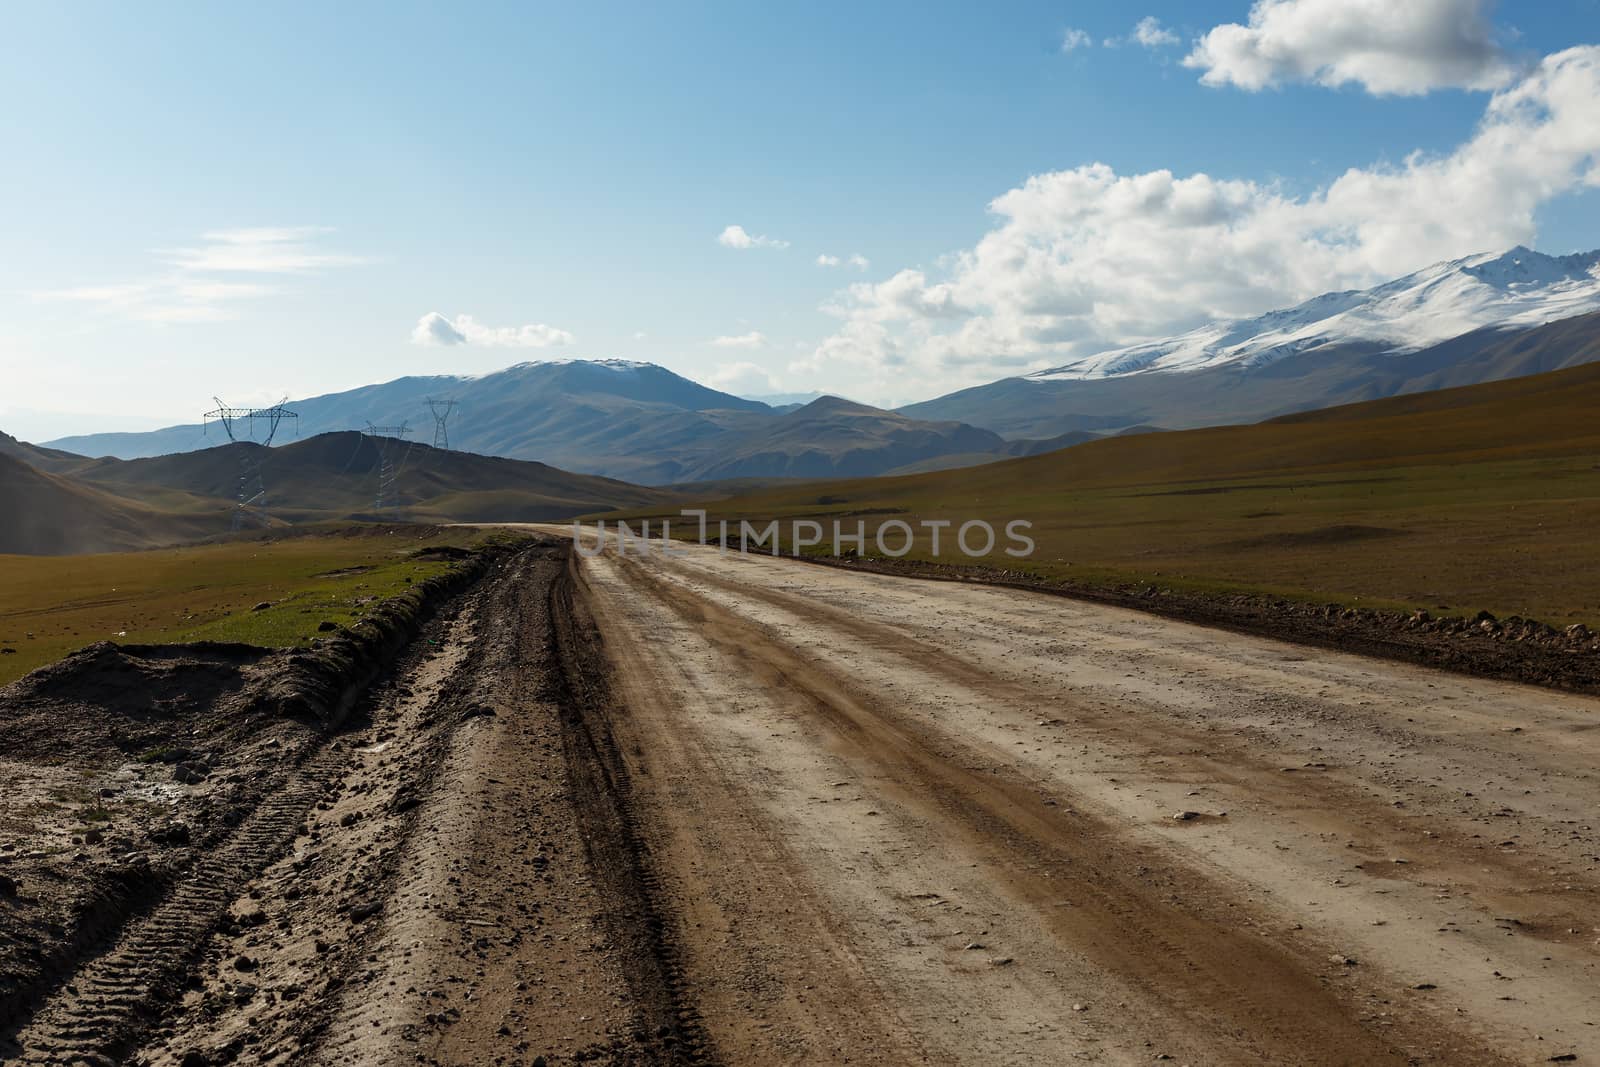 A367 highway, passing in the Naryn region by Mieszko9